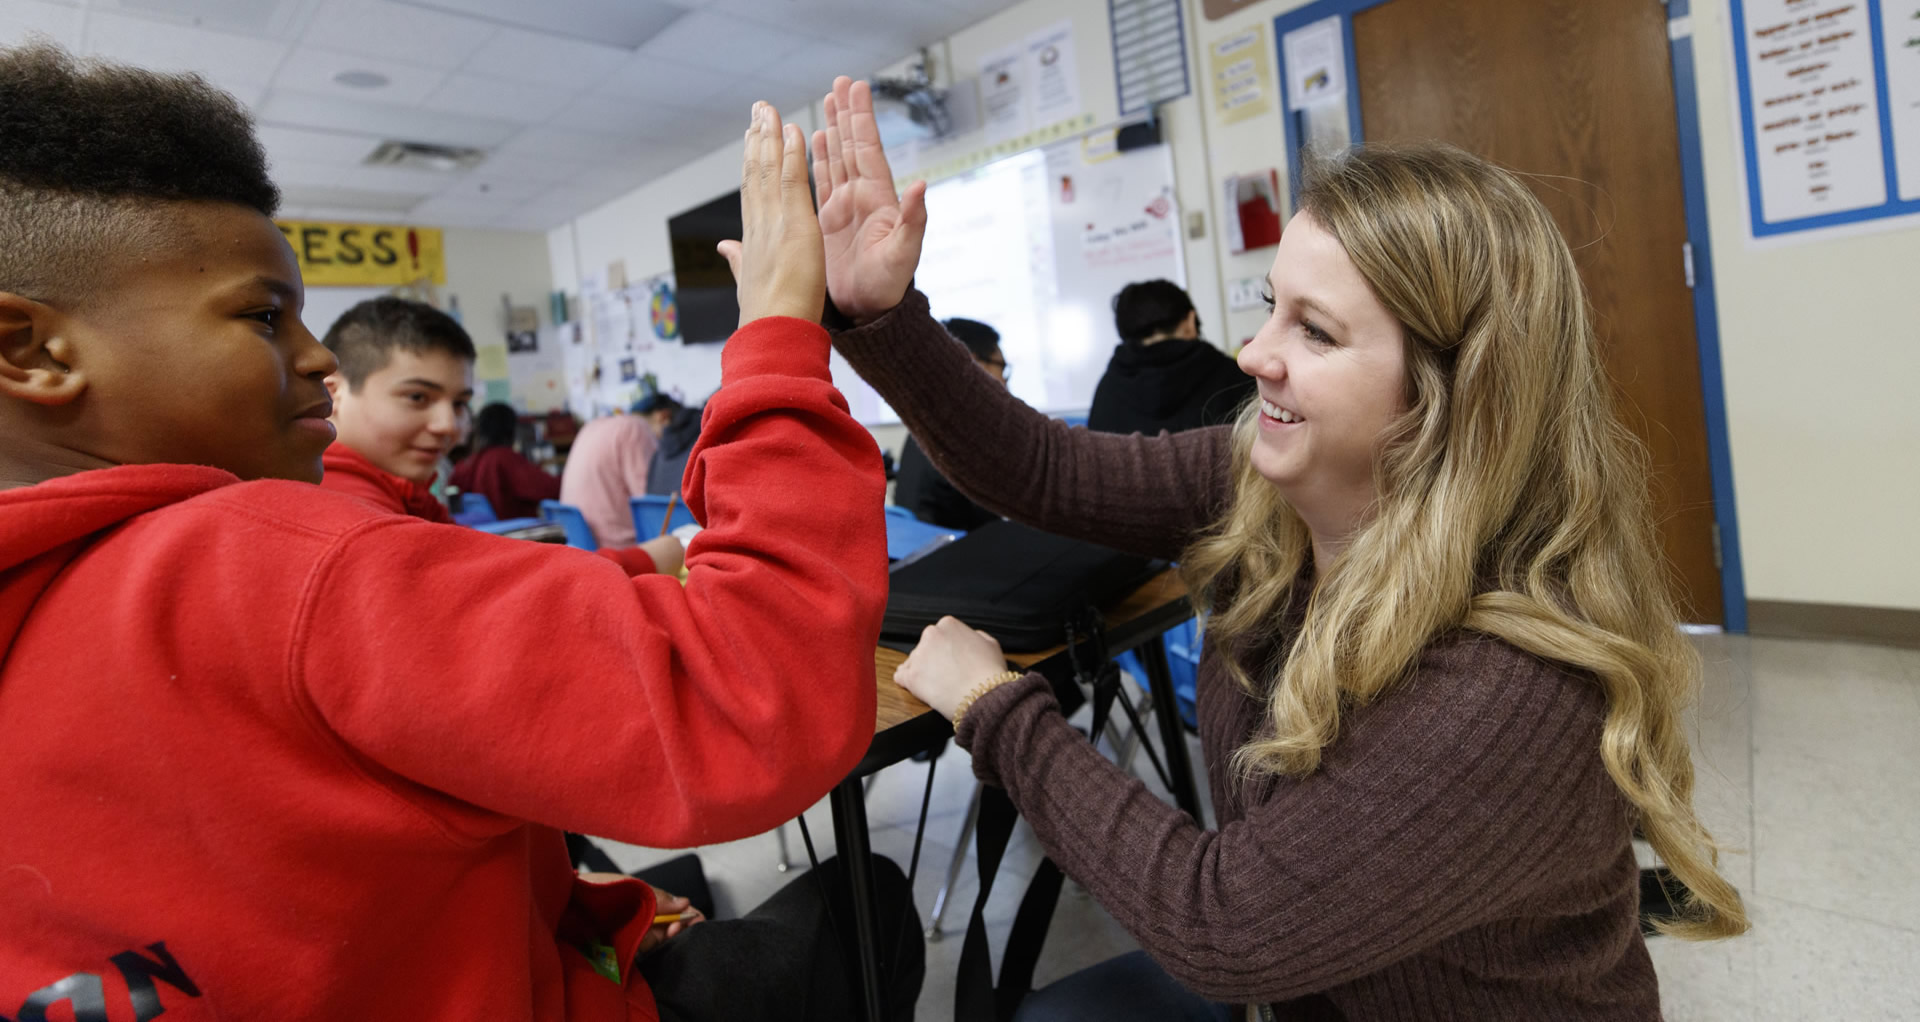 An adult and child smiling and high-fiving in a classroom setting. 